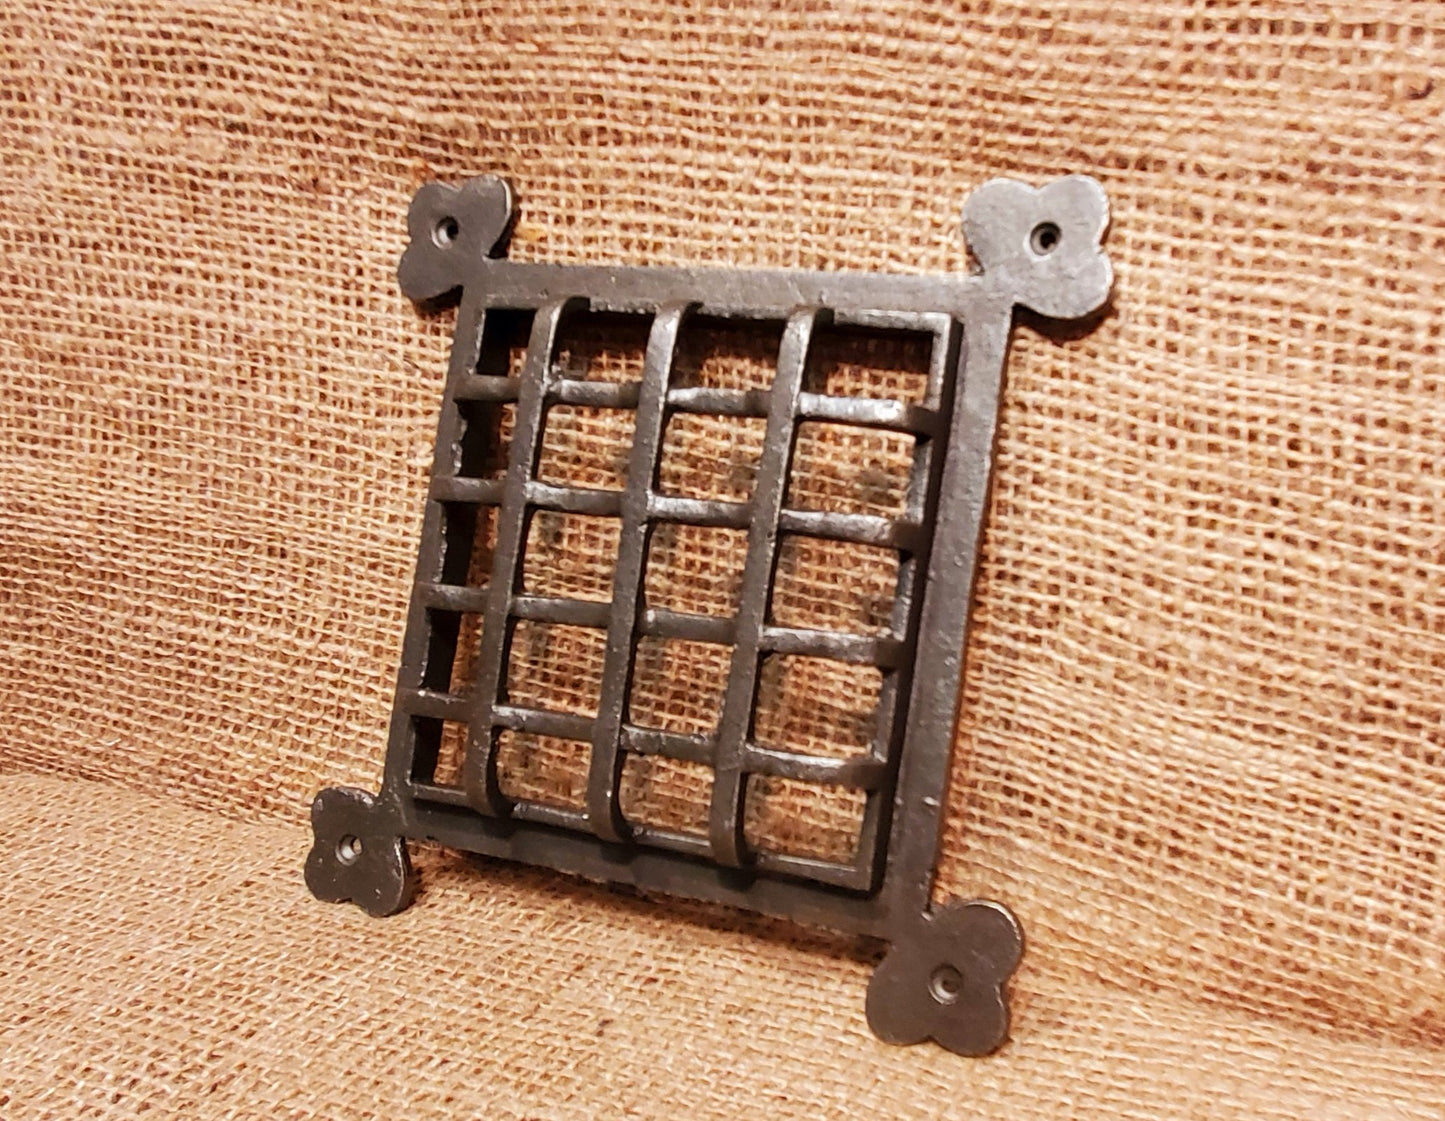 Door Grille / Viewer / Ceiling Vent Cover - 5" x 5"